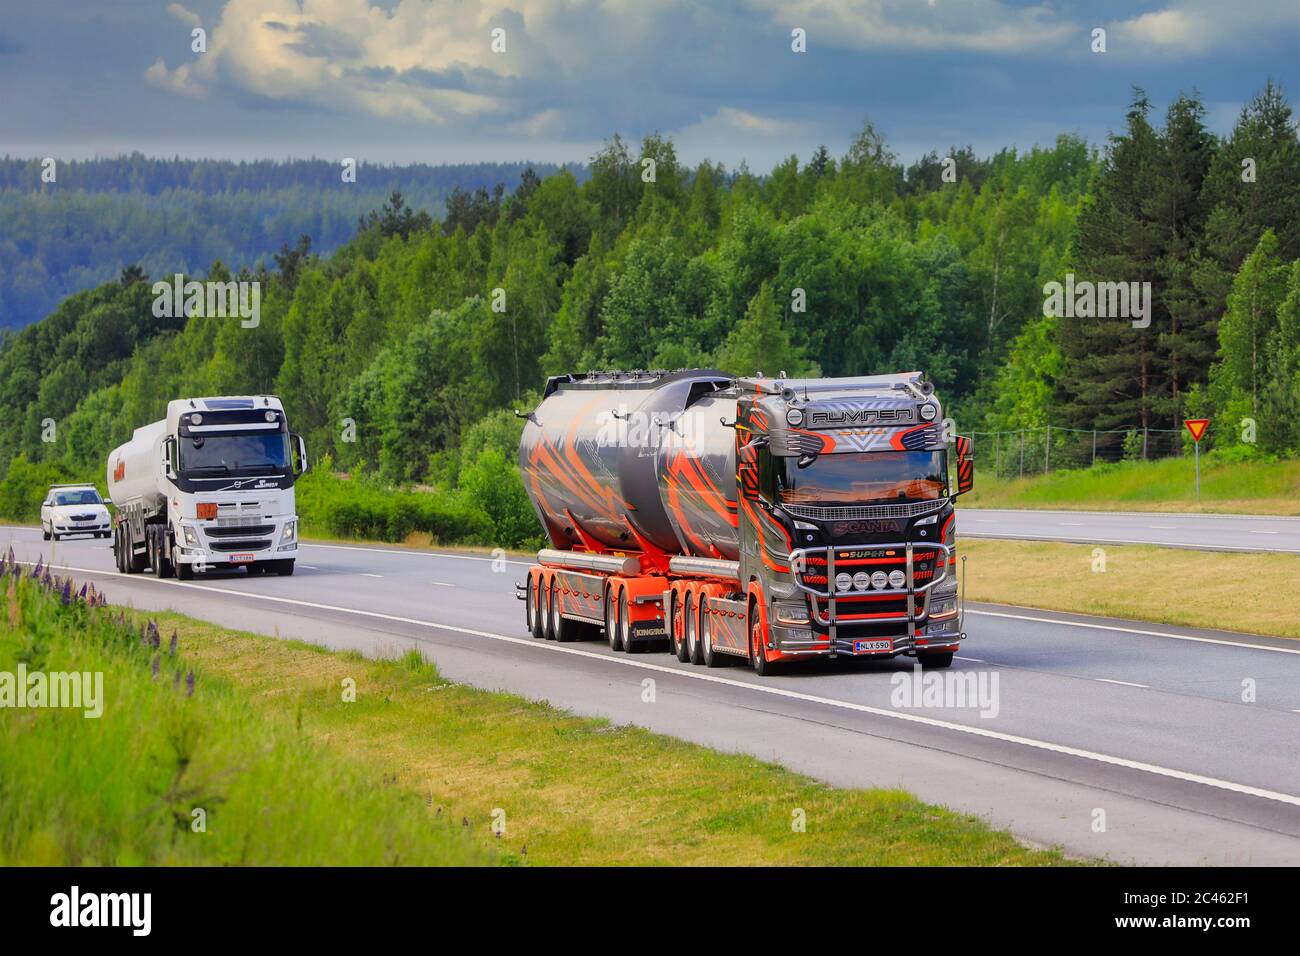 Scania S650 truck 2019 Kuljetus Auvinen Oy for bulk transport delivering load on motorway on a day of summer. Salo, Finland. June 16, 2020. Stock Photo